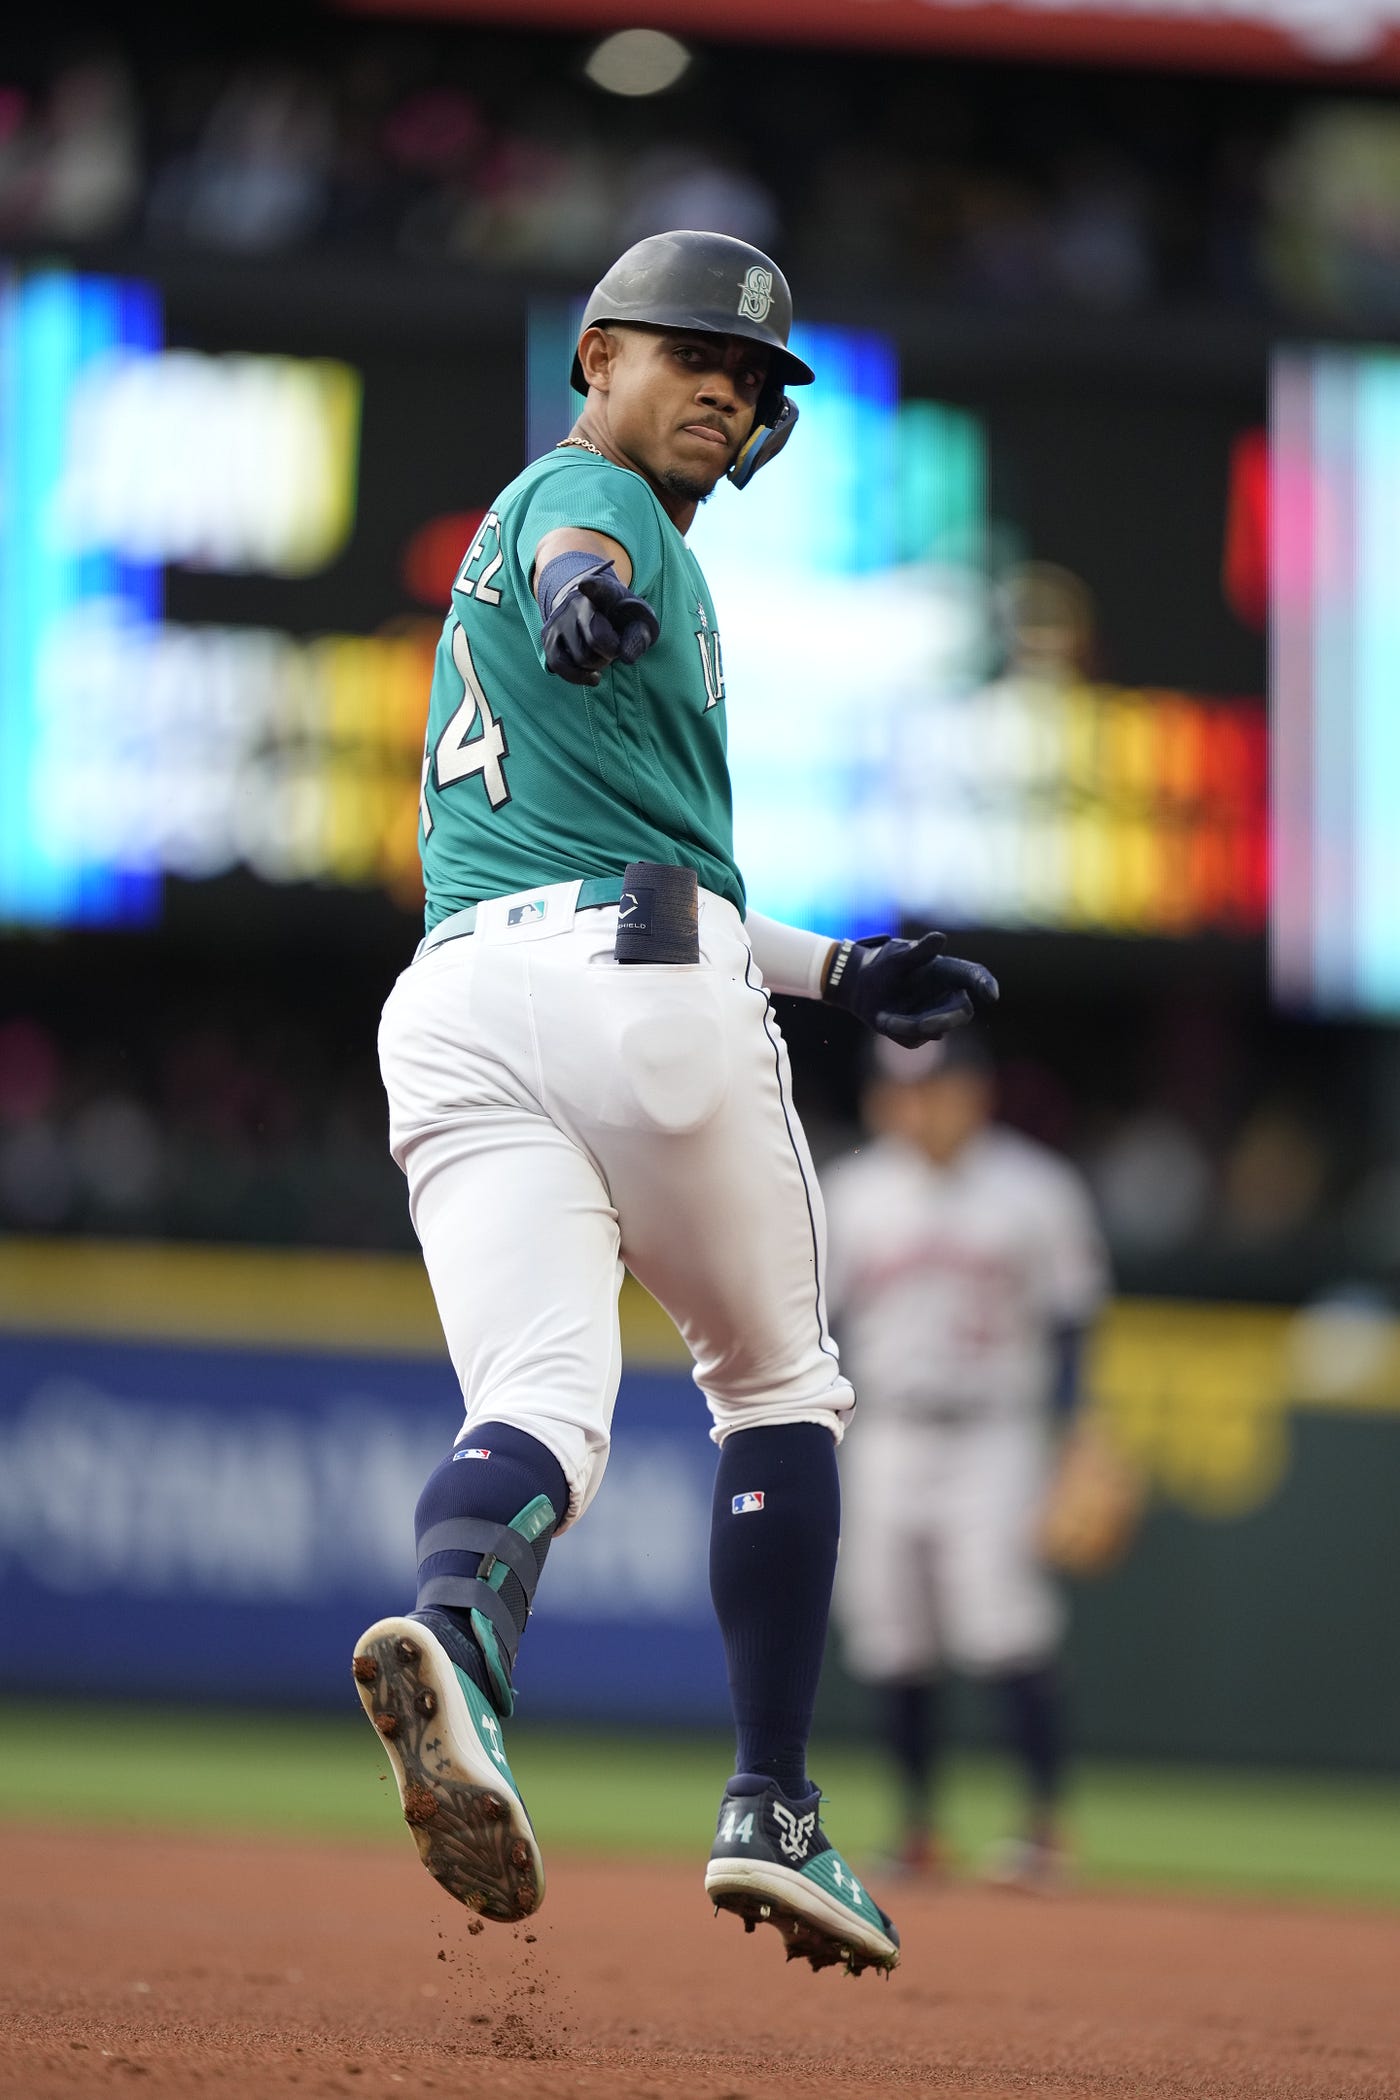 Mariners' Julio Rodriguez named AL Rookie of the Year